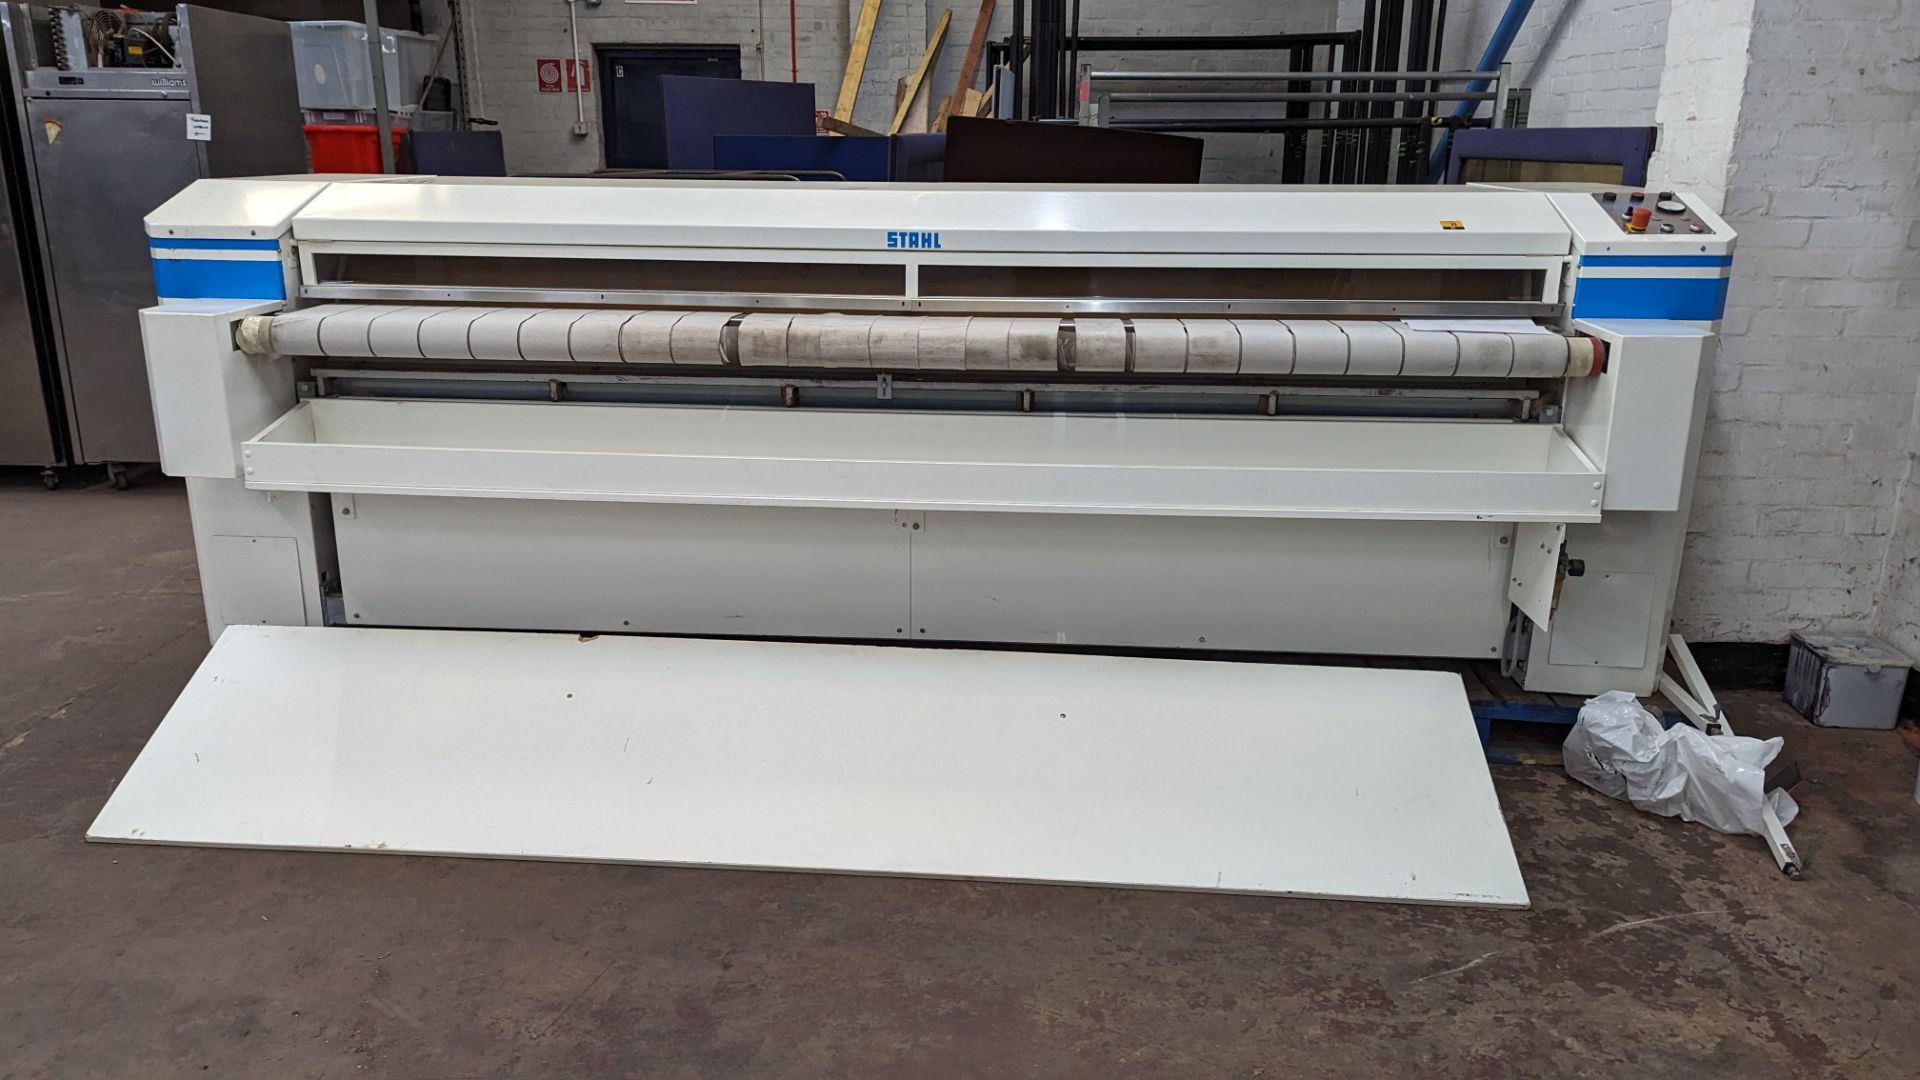 2017 Stahl flatwork ironer Super Chest ironing system, type MC 600/3000 D - Image 16 of 20